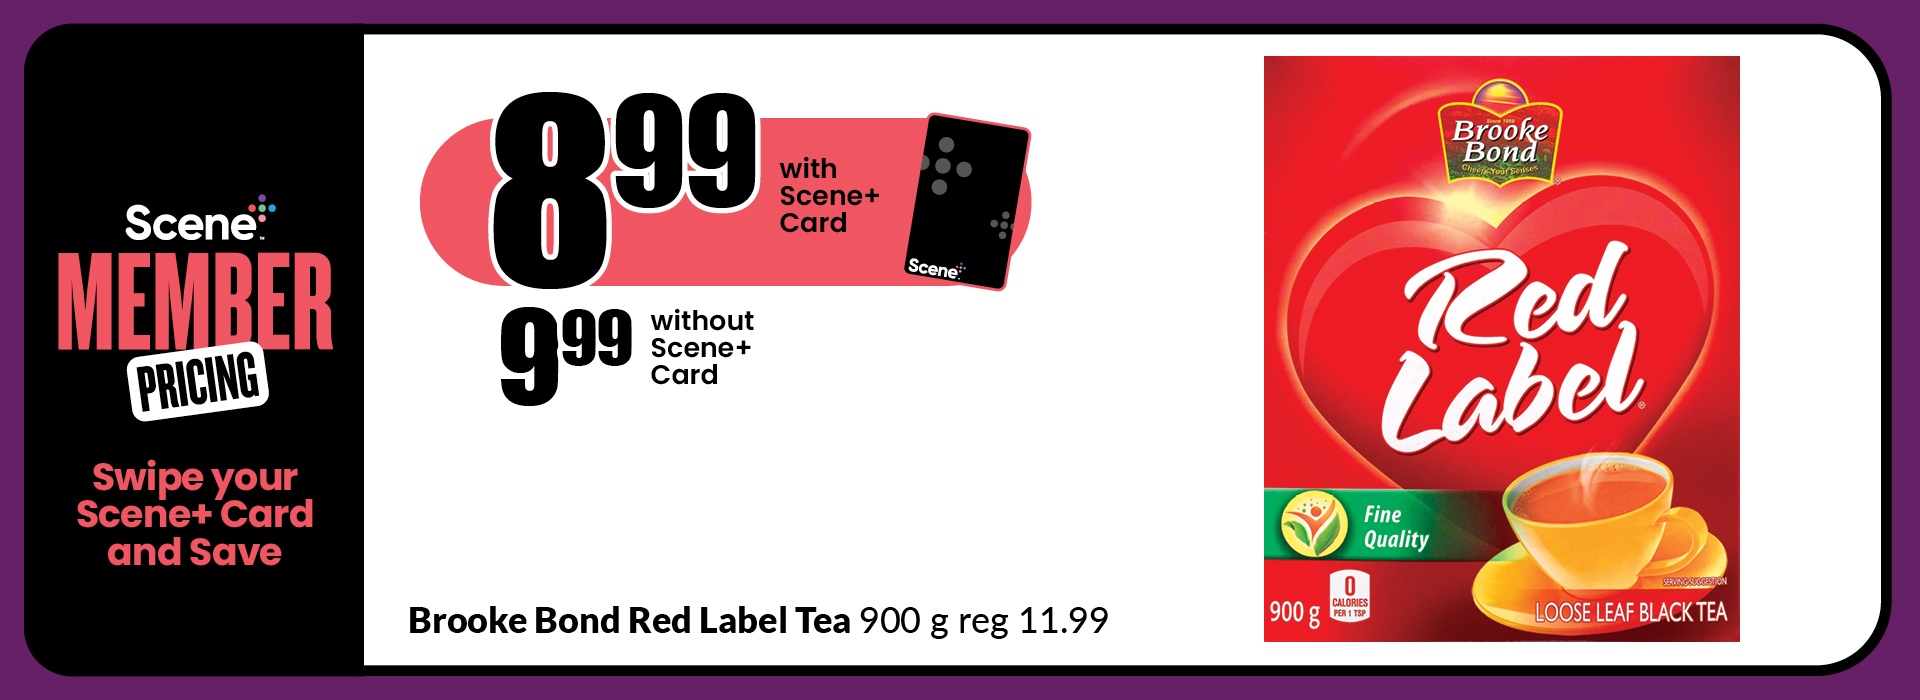 The following image consists of the text, "Scene Member Pricing, Swipe your Scene+ Card and Save, get $8.99 with Scene+ Card and $9.99 without Scene+ Card, Brooke Bond Red Label Tea 900g reg 11.99."